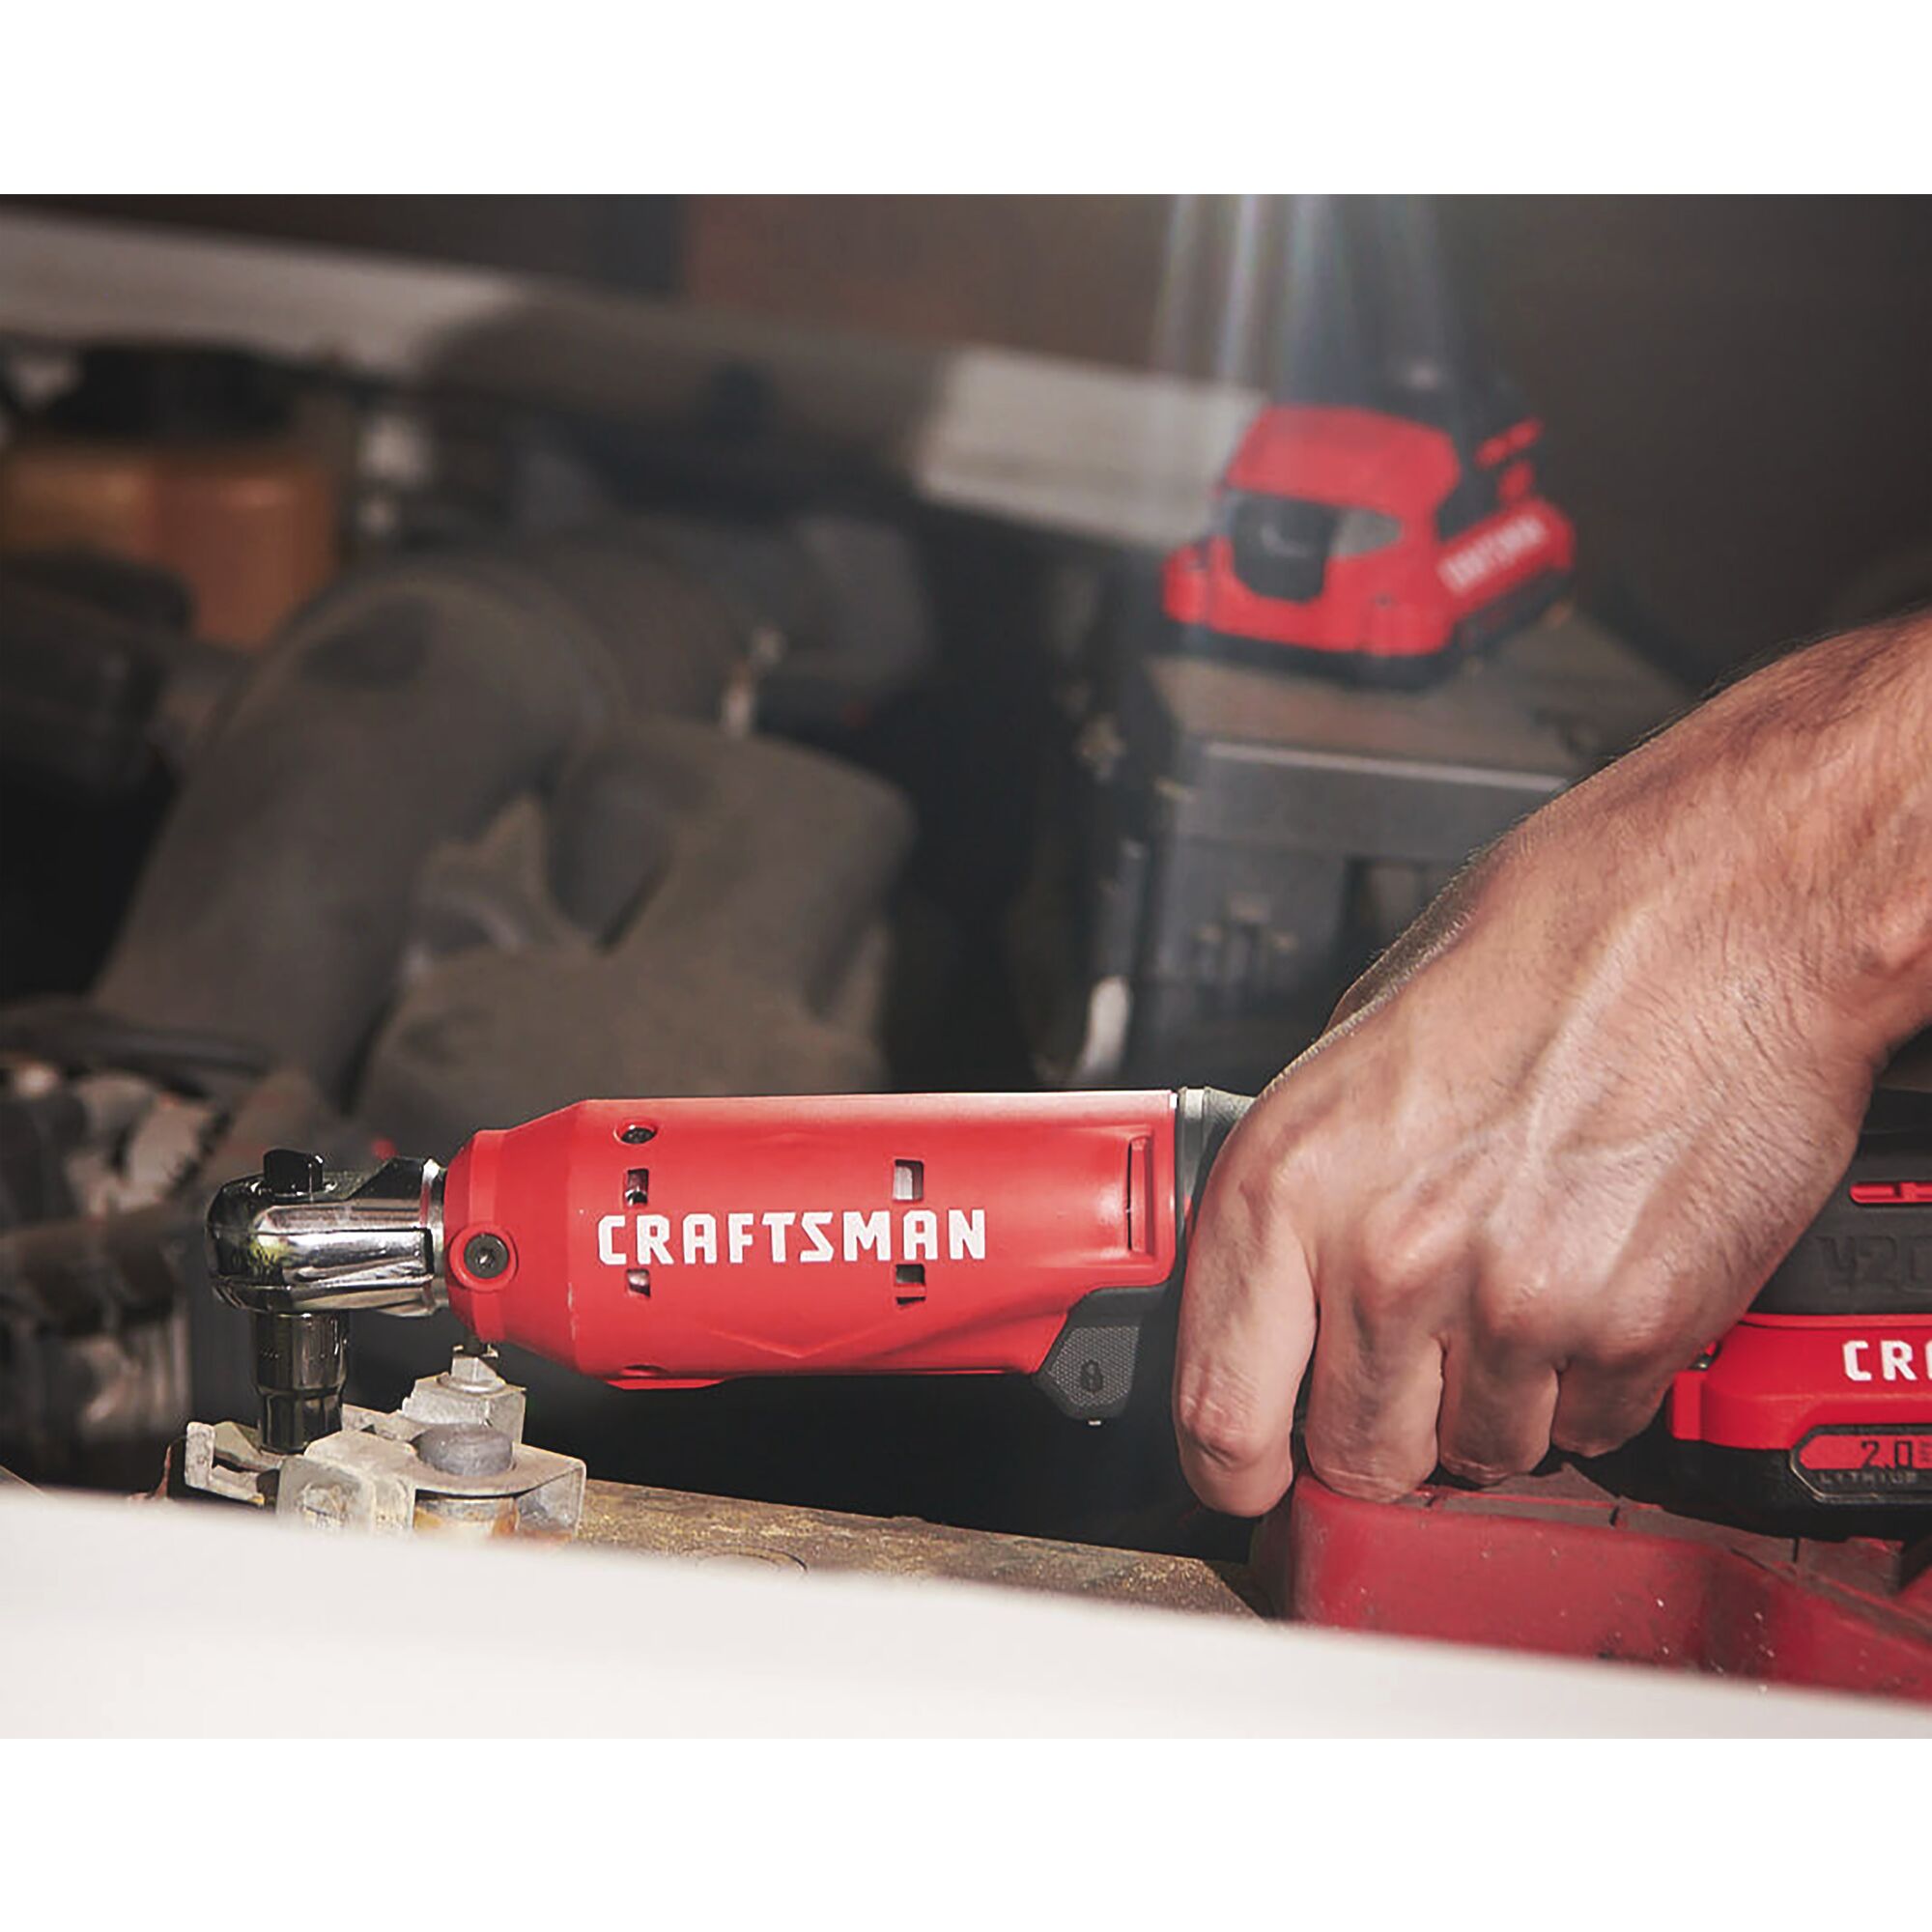 View of CRAFTSMAN Ratchets  being used by consumer